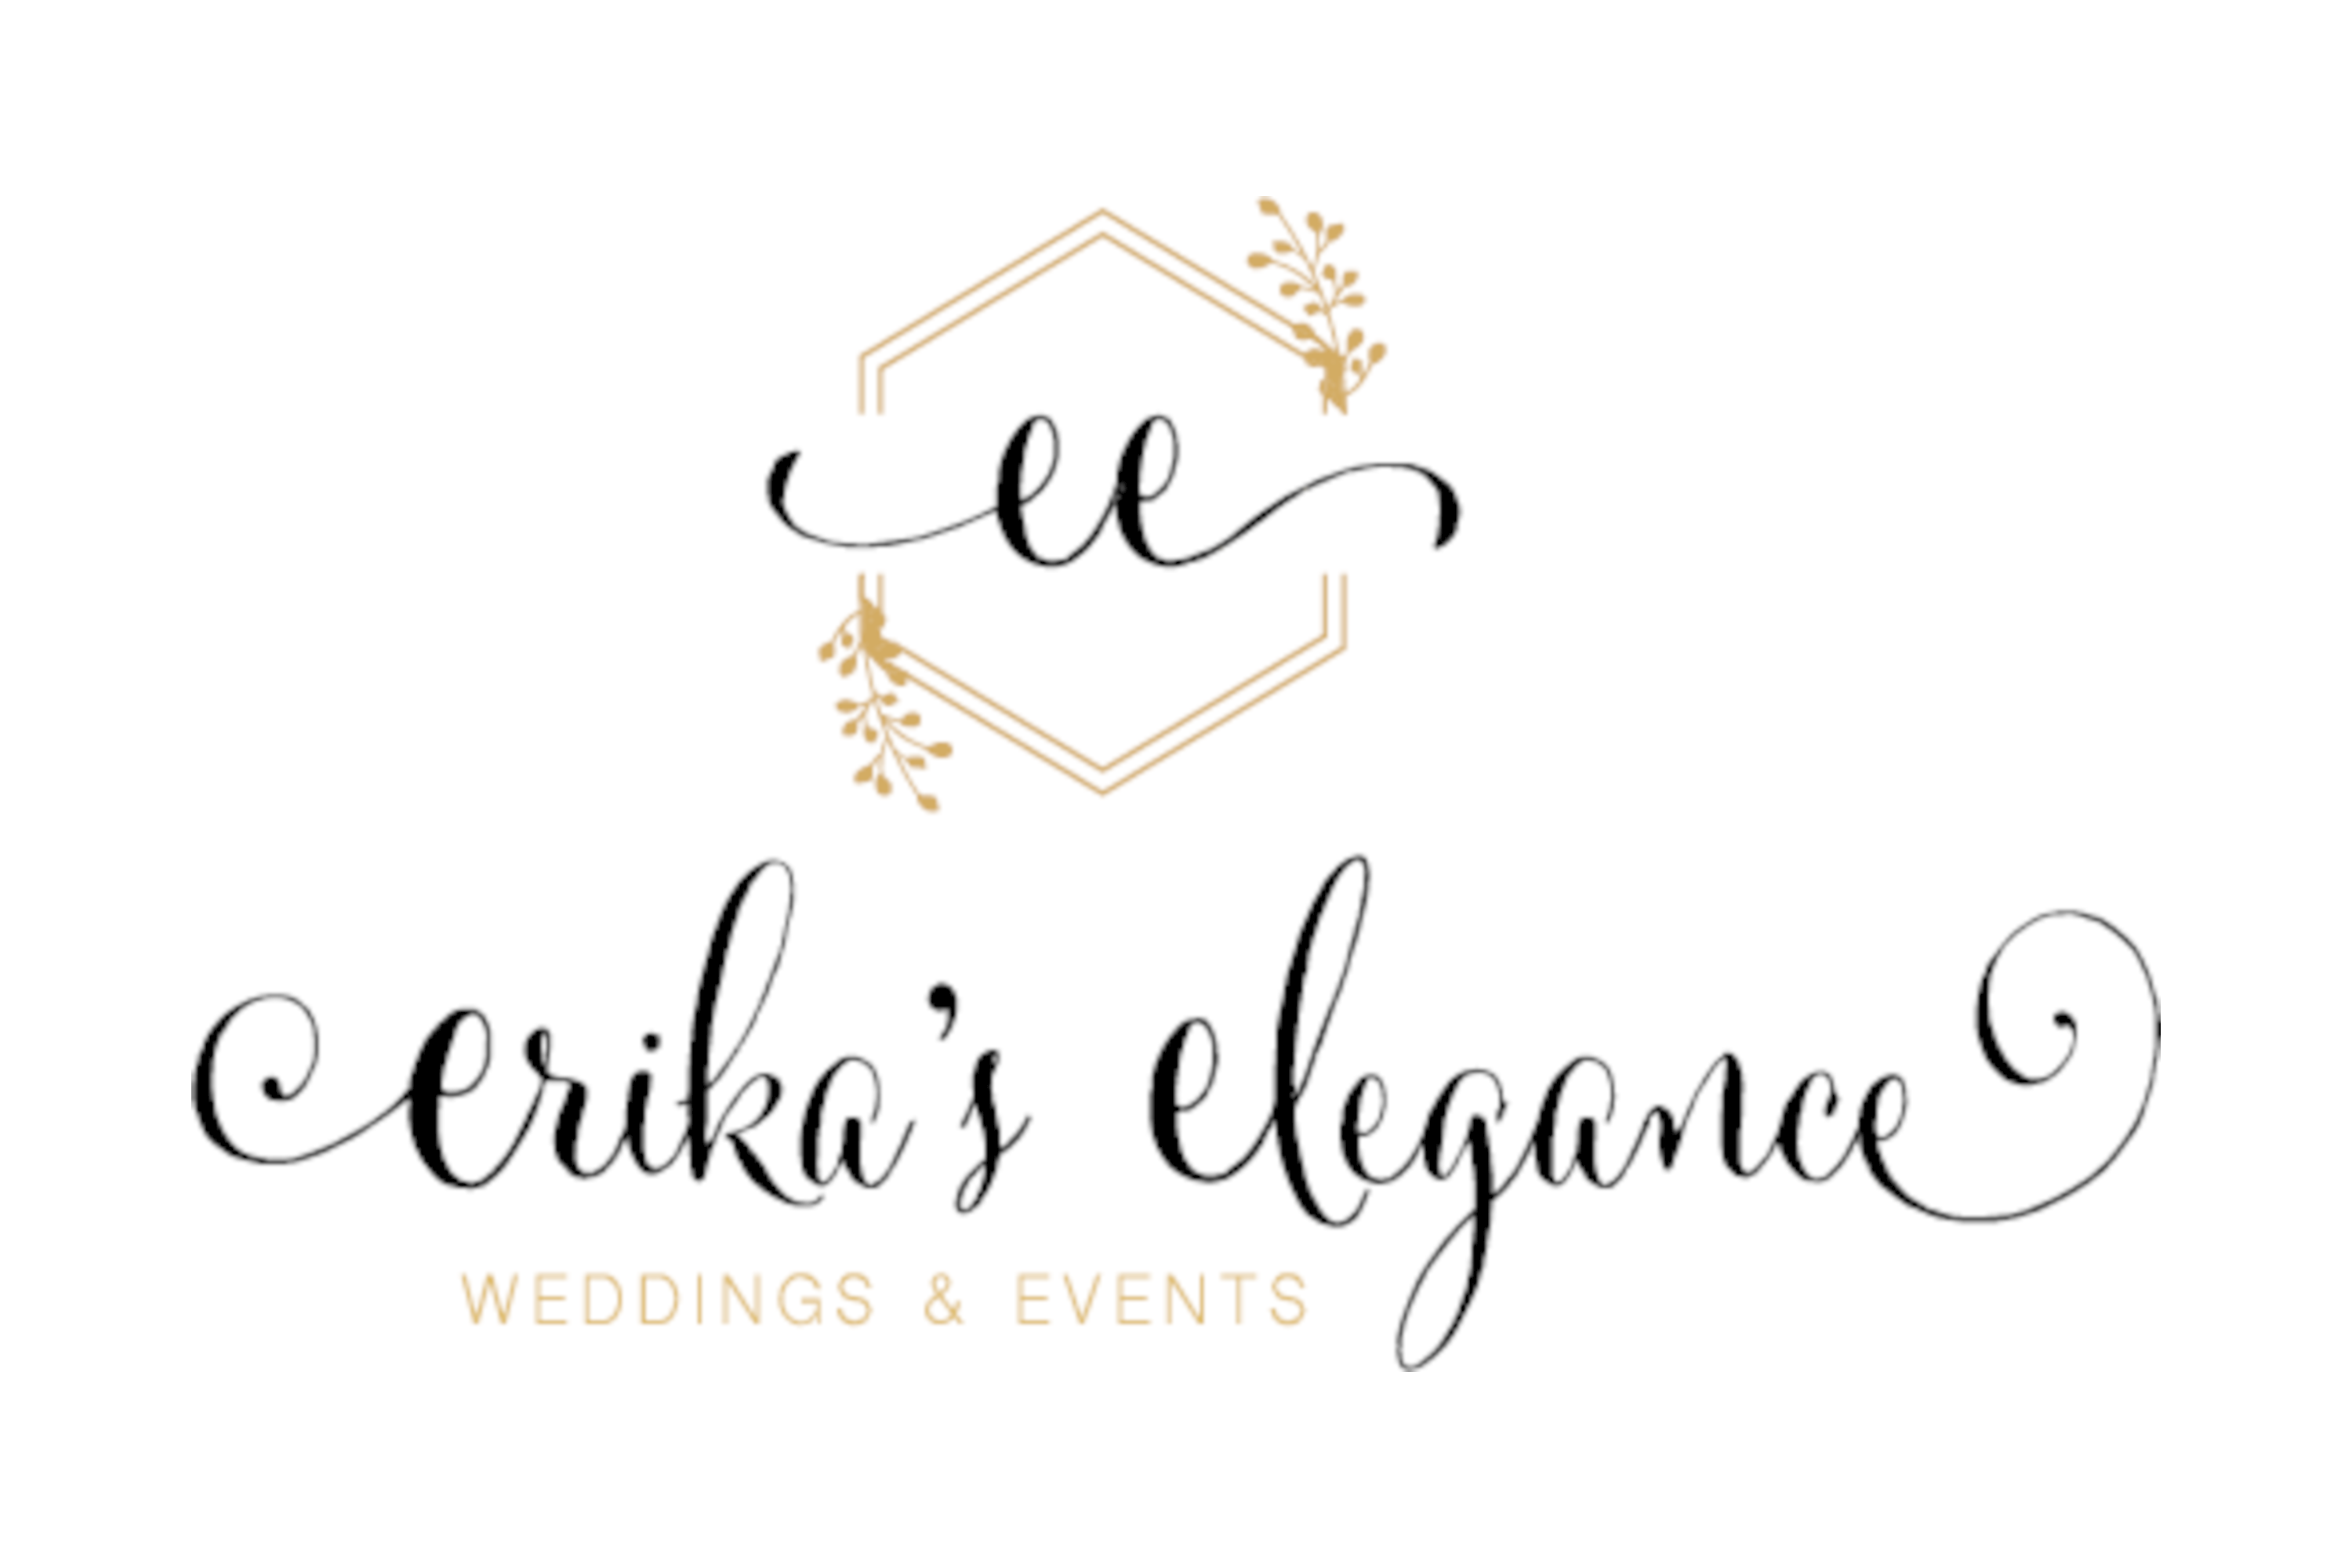 Erika's Elegance Wedding & Events Logo in cursive with gold accents